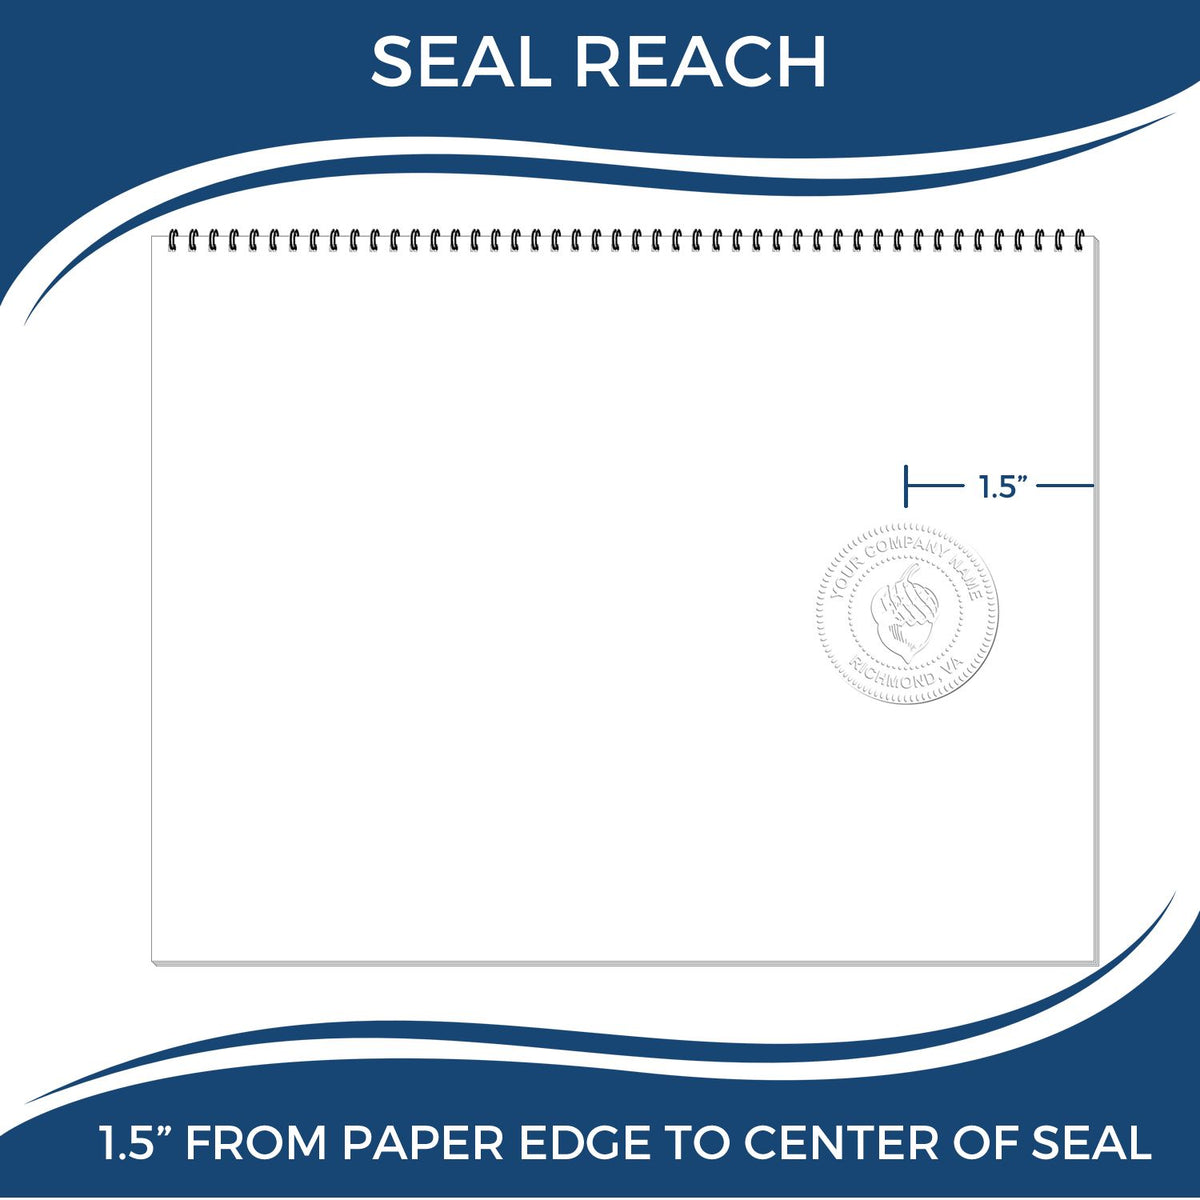 An infographic showing the seal reach which is represented by a ruler and a miniature seal image of the Hybrid Oregon Geologist Seal